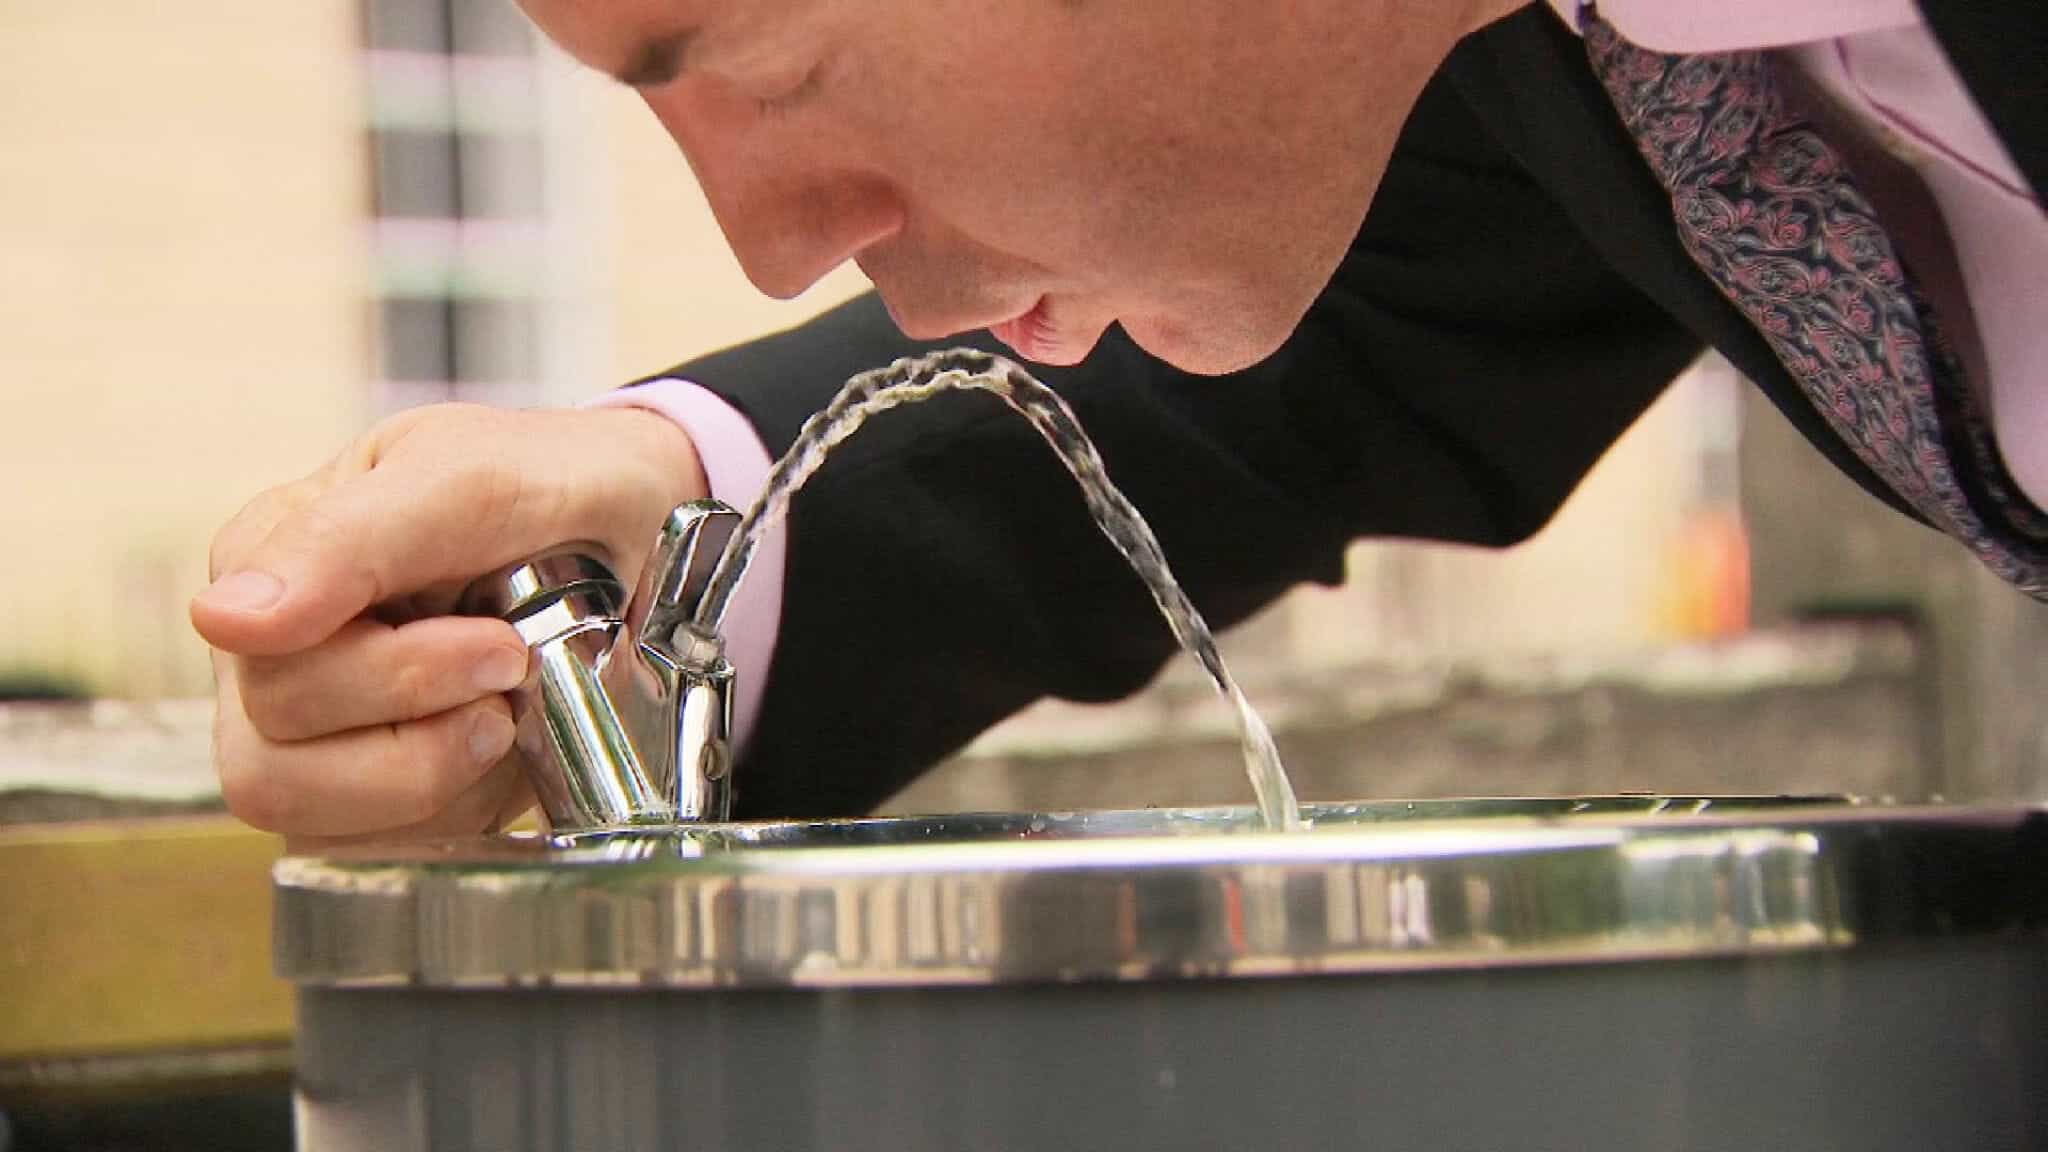 Public drinking fountains can reduce single-use plastic bottles' use